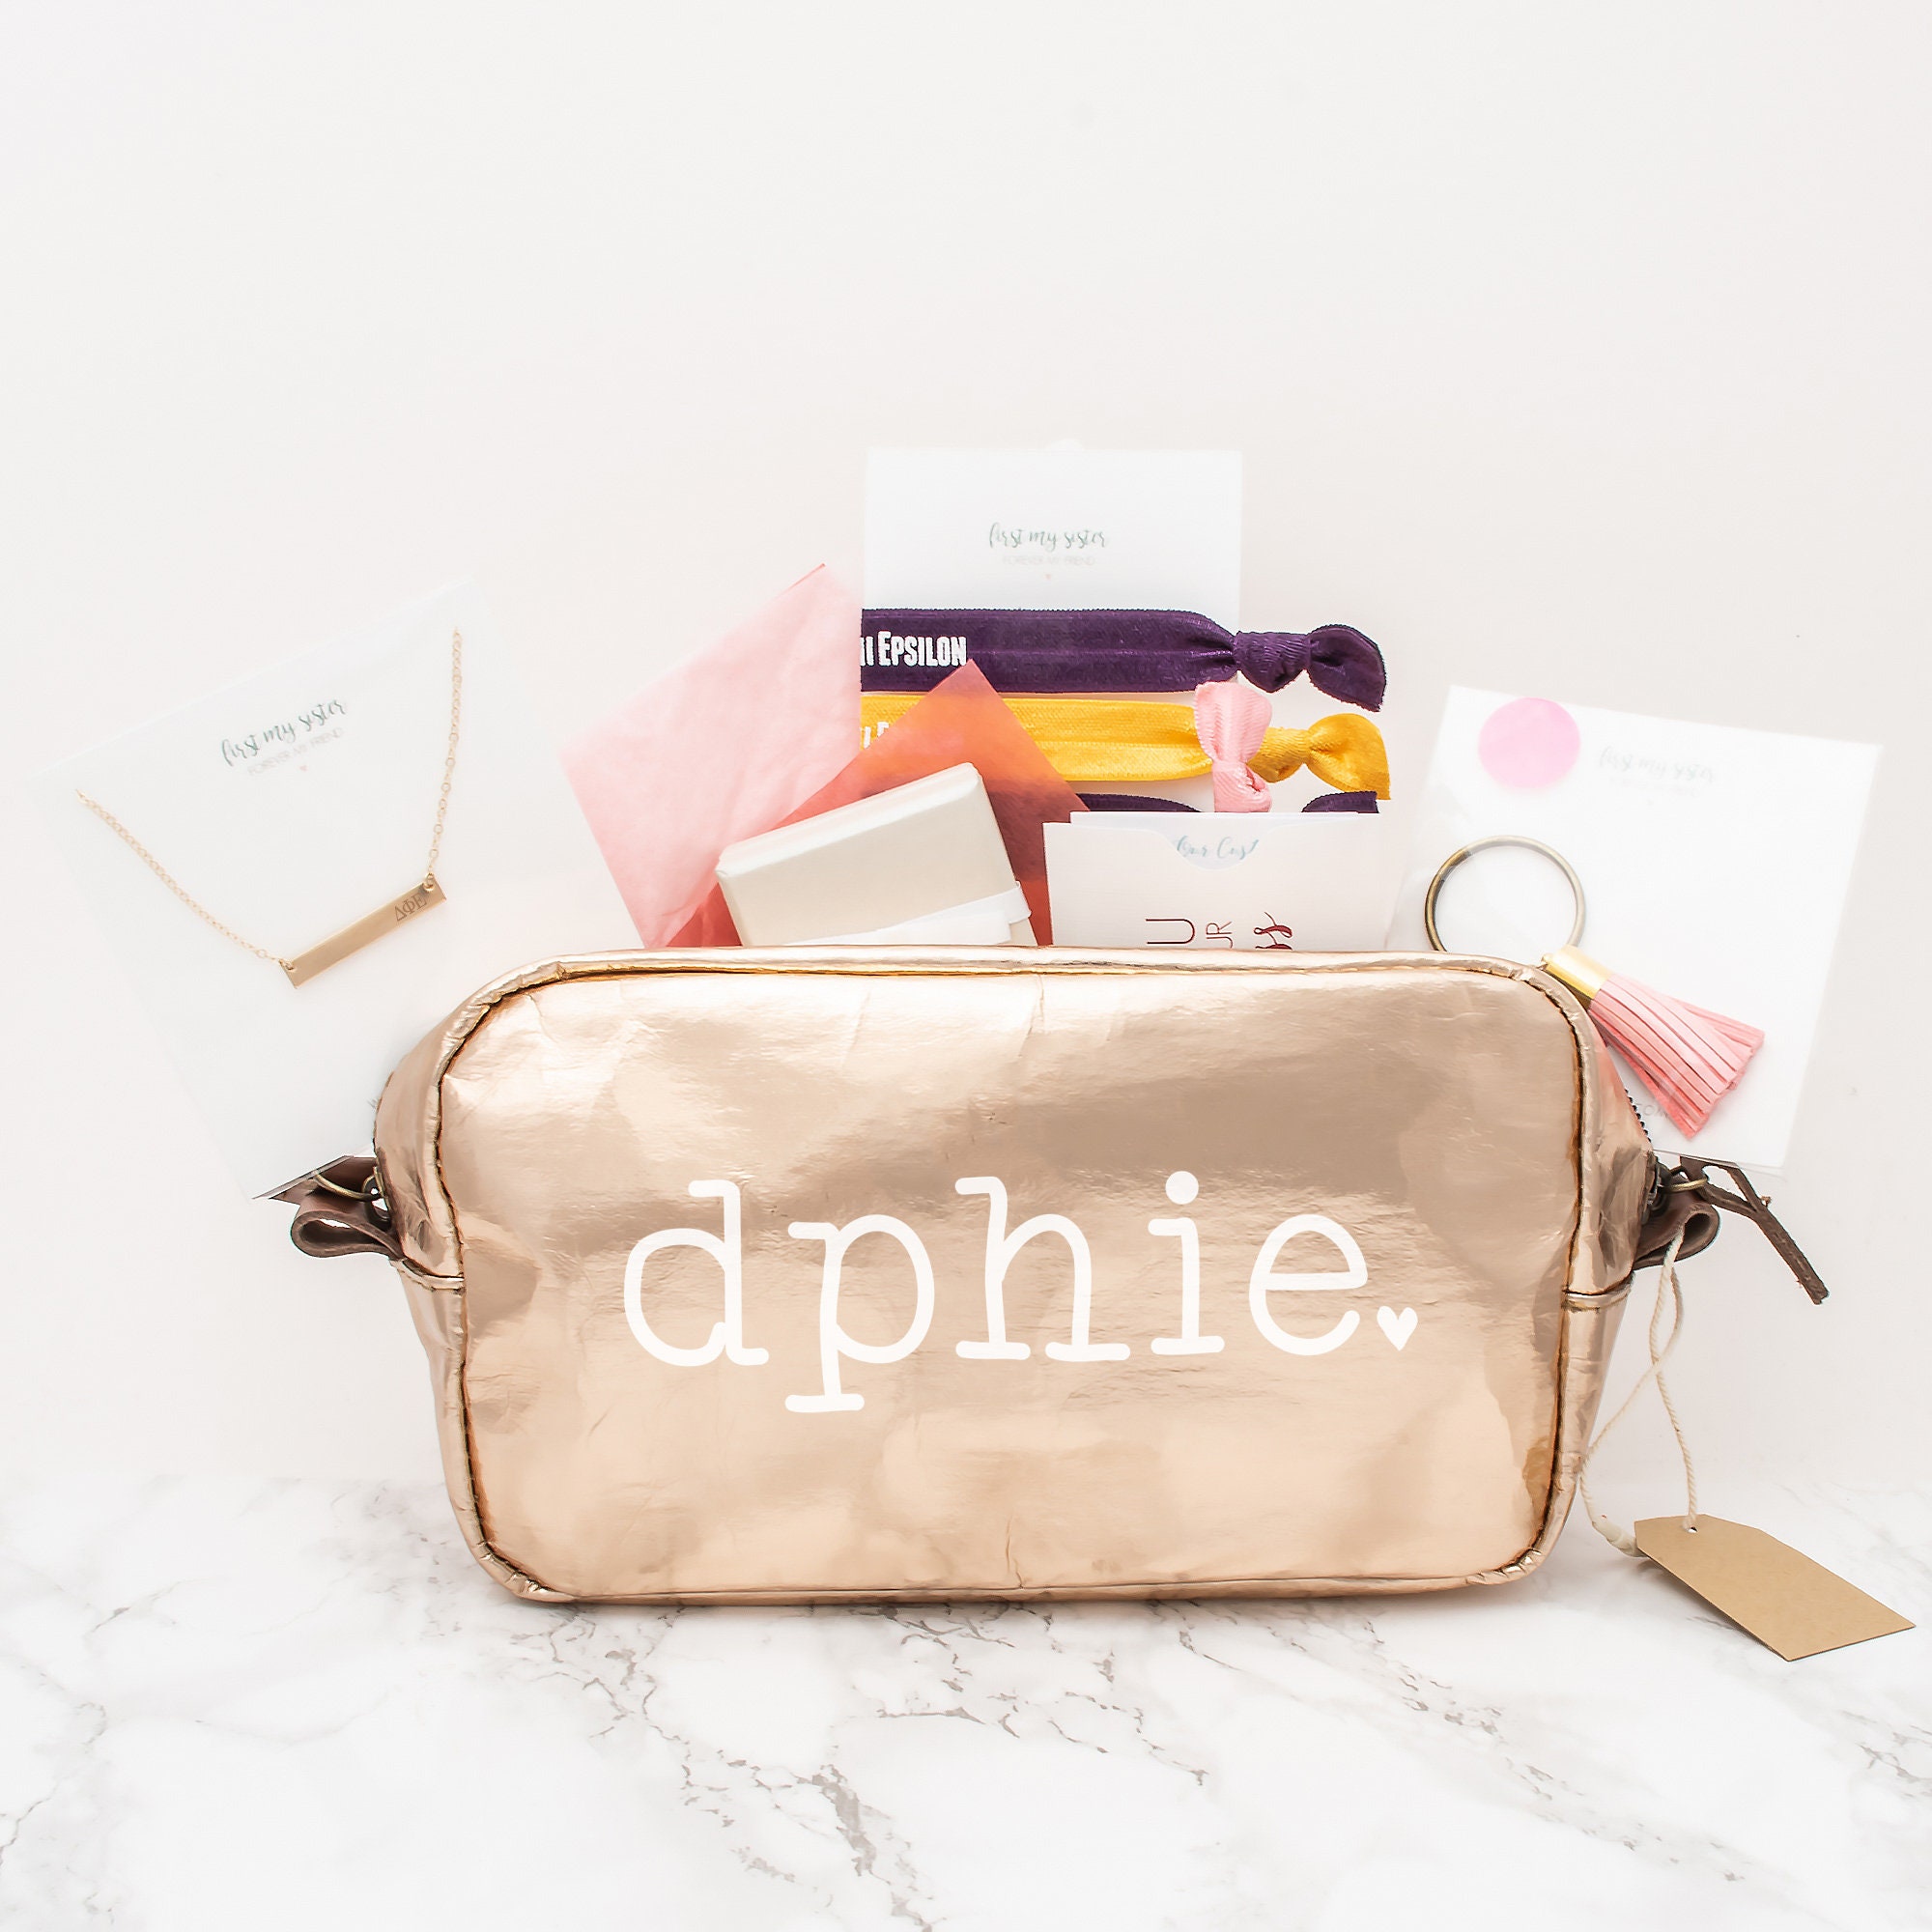 Delta Phi Epsilon Gift Set, Dphie Sorority Gifts Bundle, Greek Pack With D E Bag, Bar Necklace, Rings, Hair Ties & Keychain